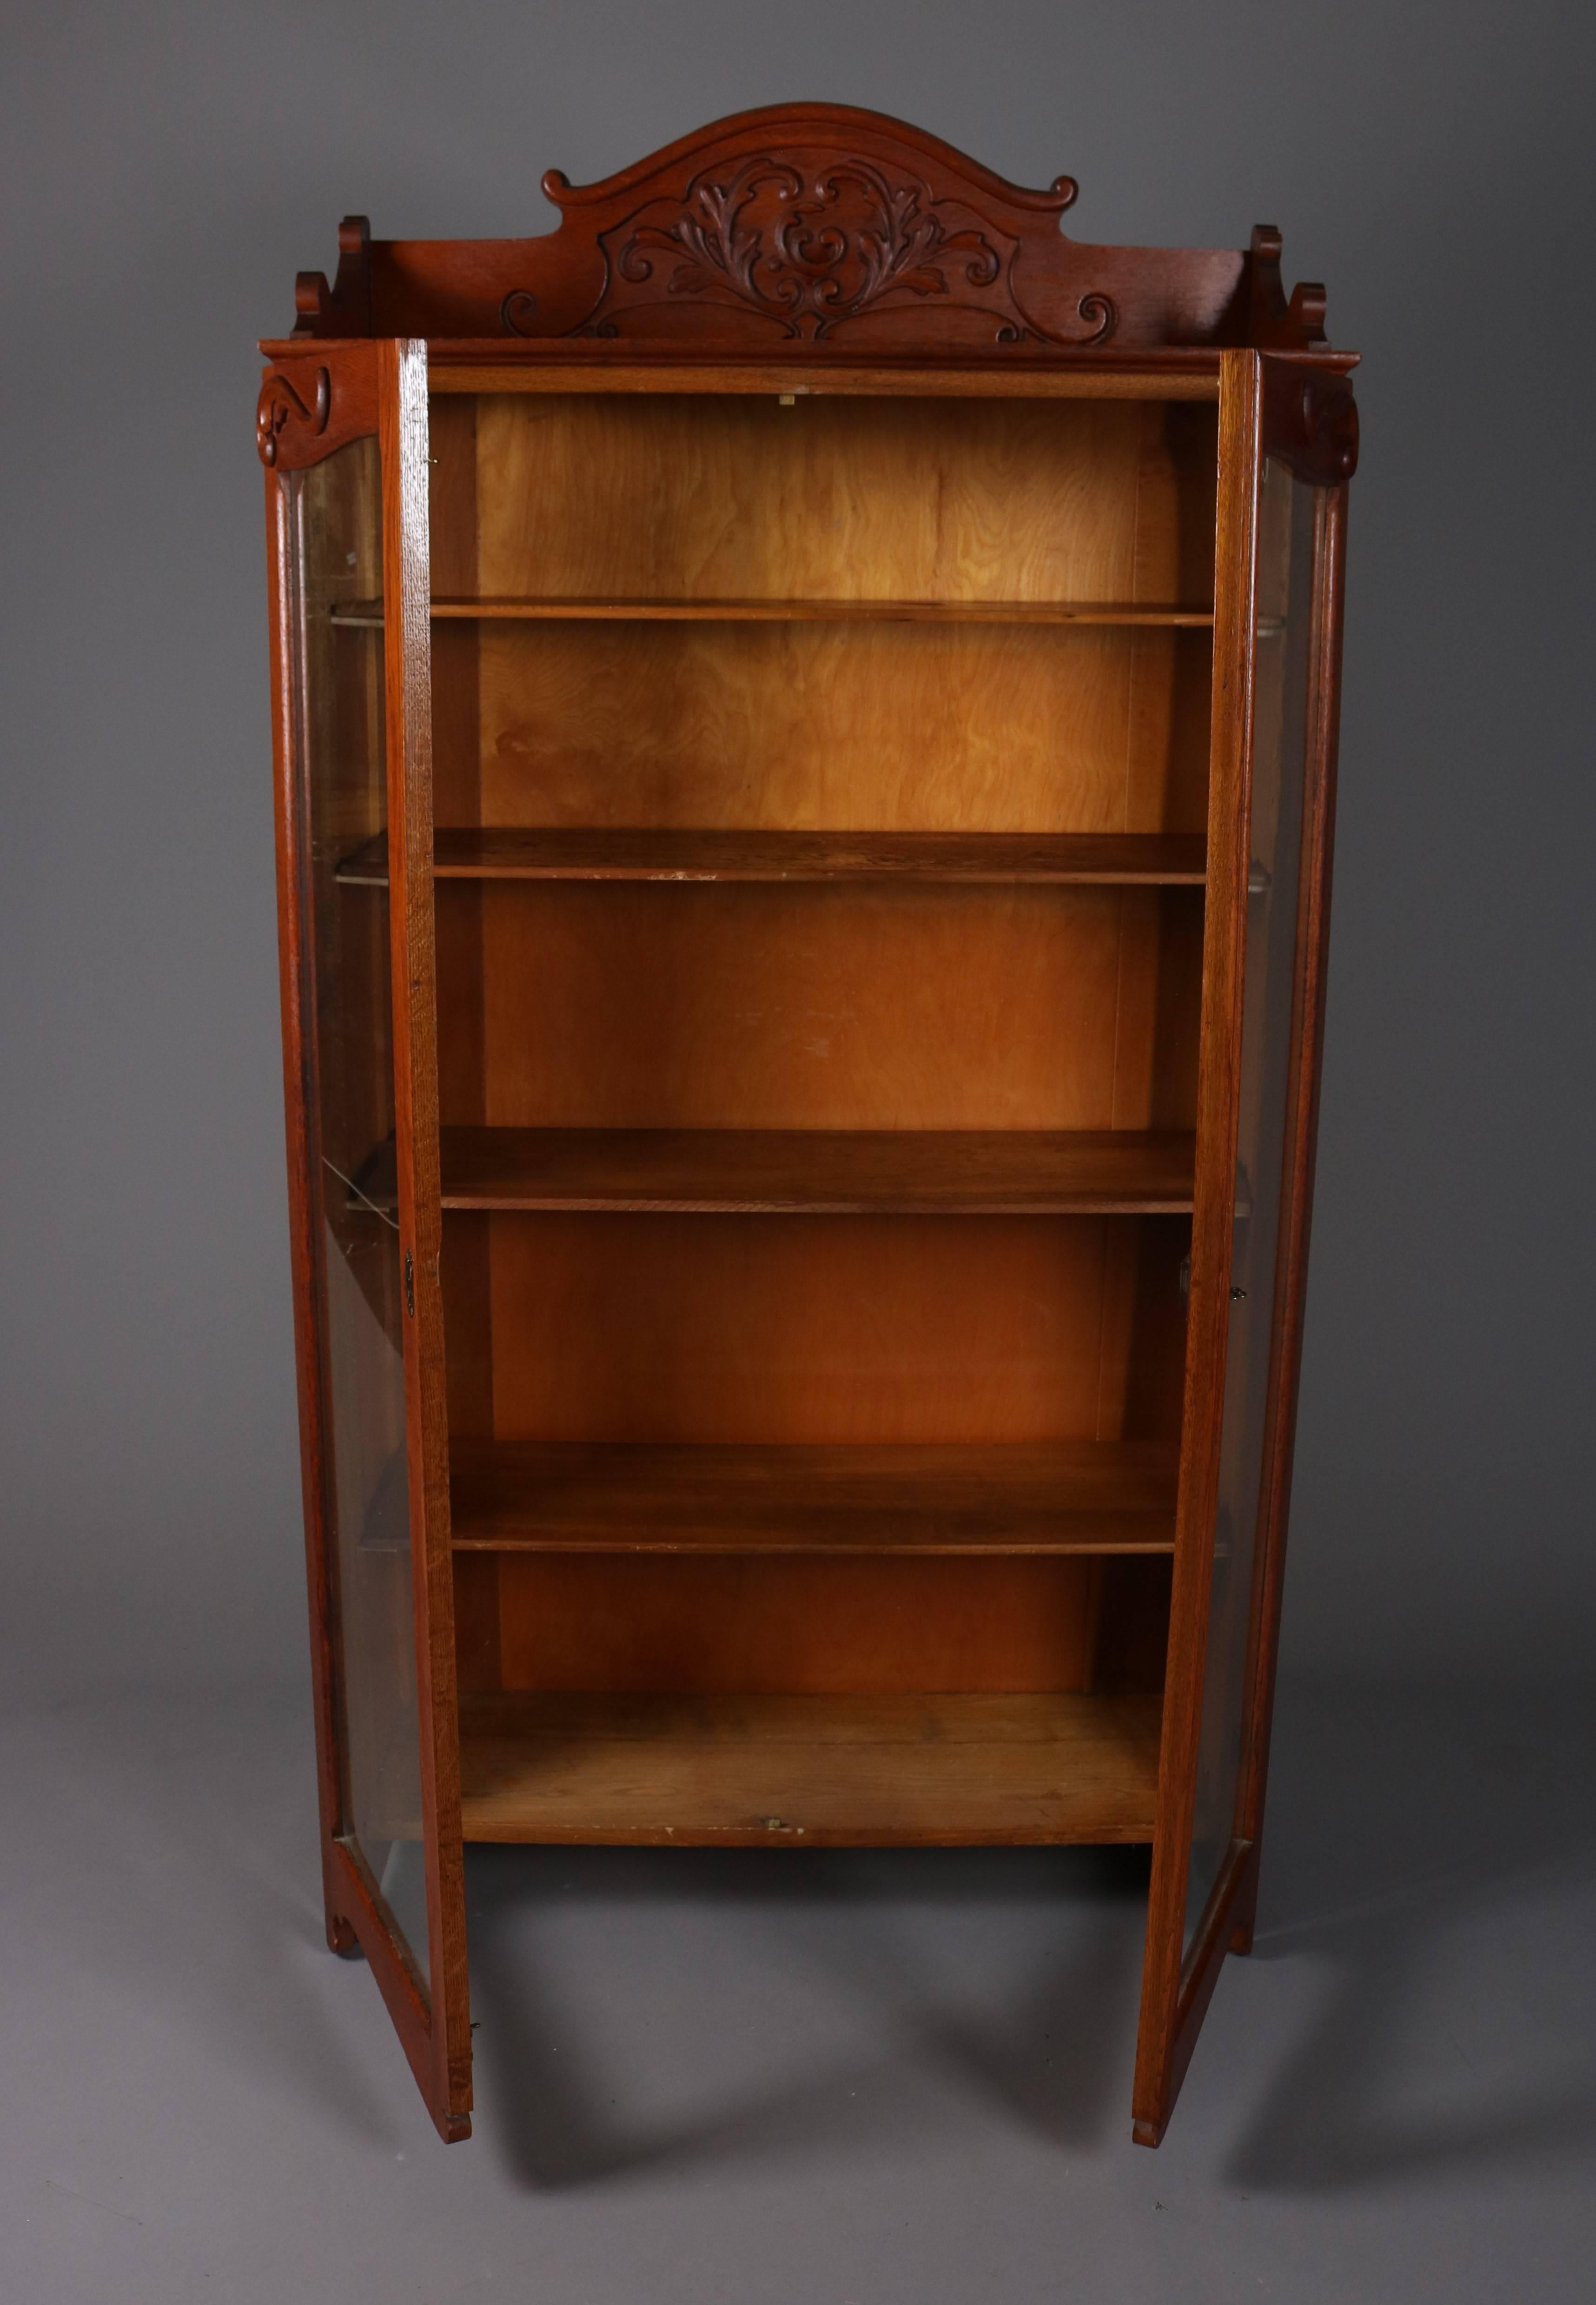 Antique oak bookcase features carved scroll and acanthus decoration, two glass doors, and adjustable interior shelving, 20th century

Measures: 71